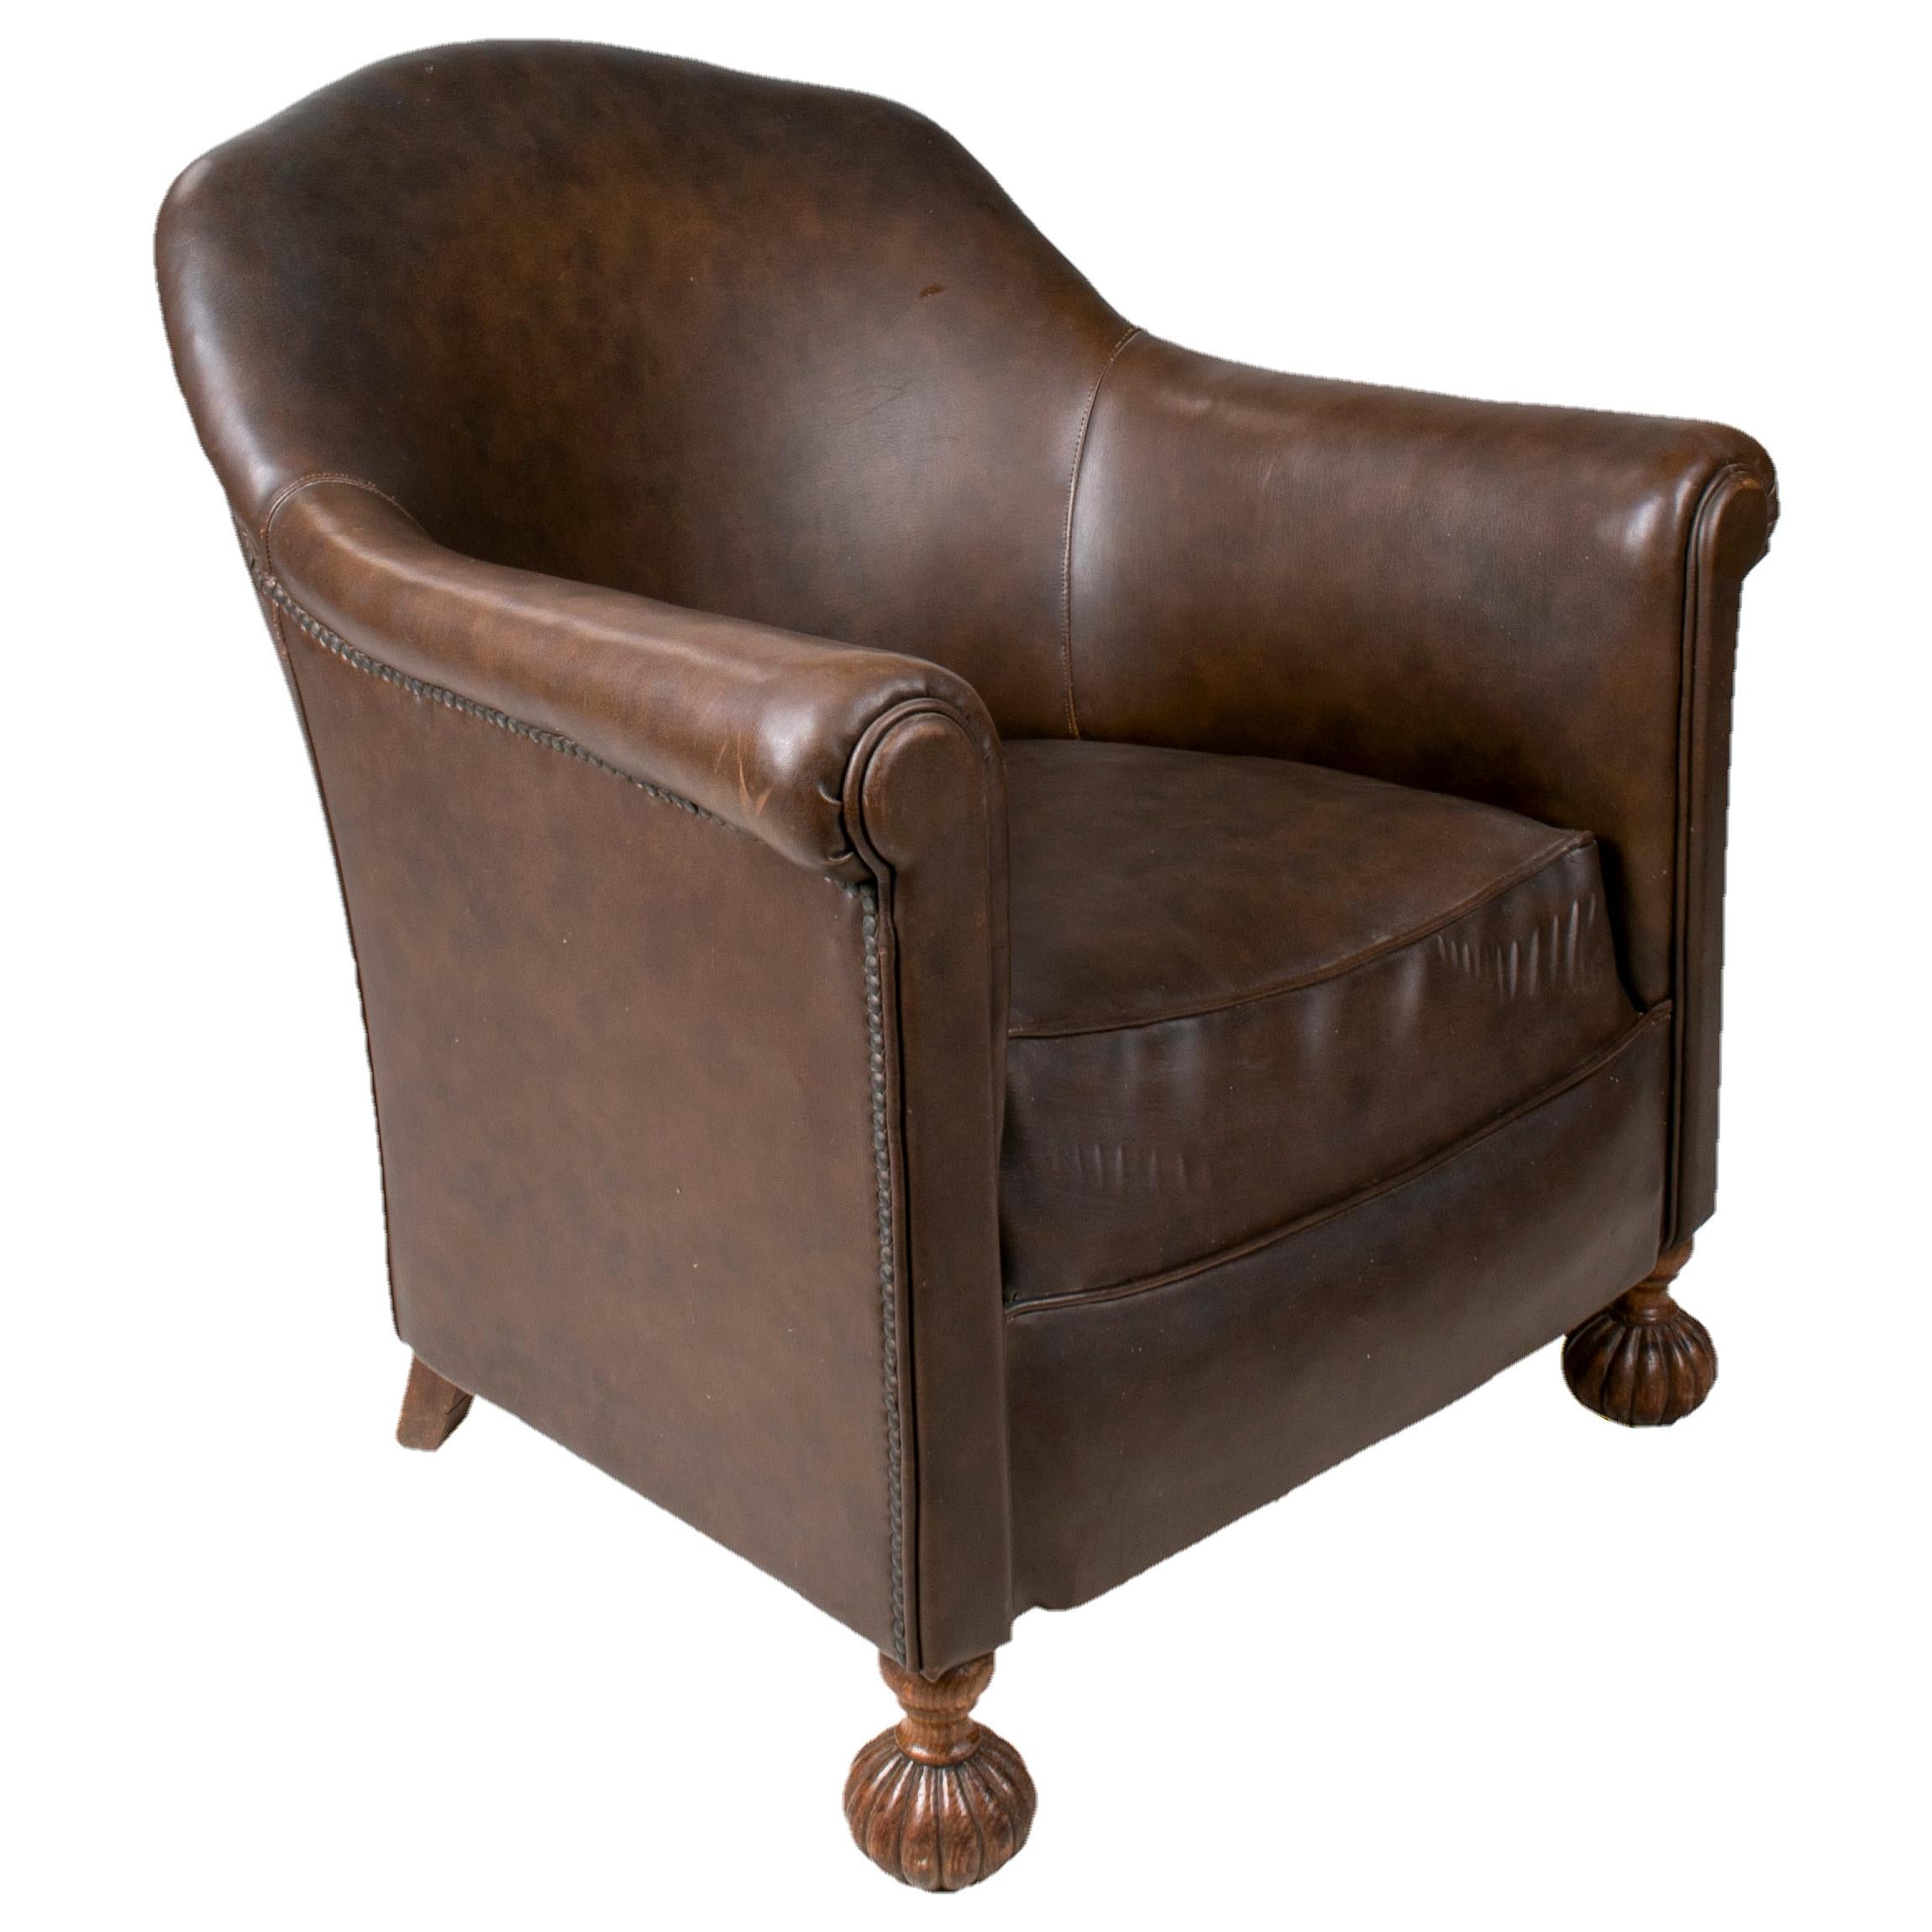 1950s French Leather imitation Armchair with Ornate Carved Wood